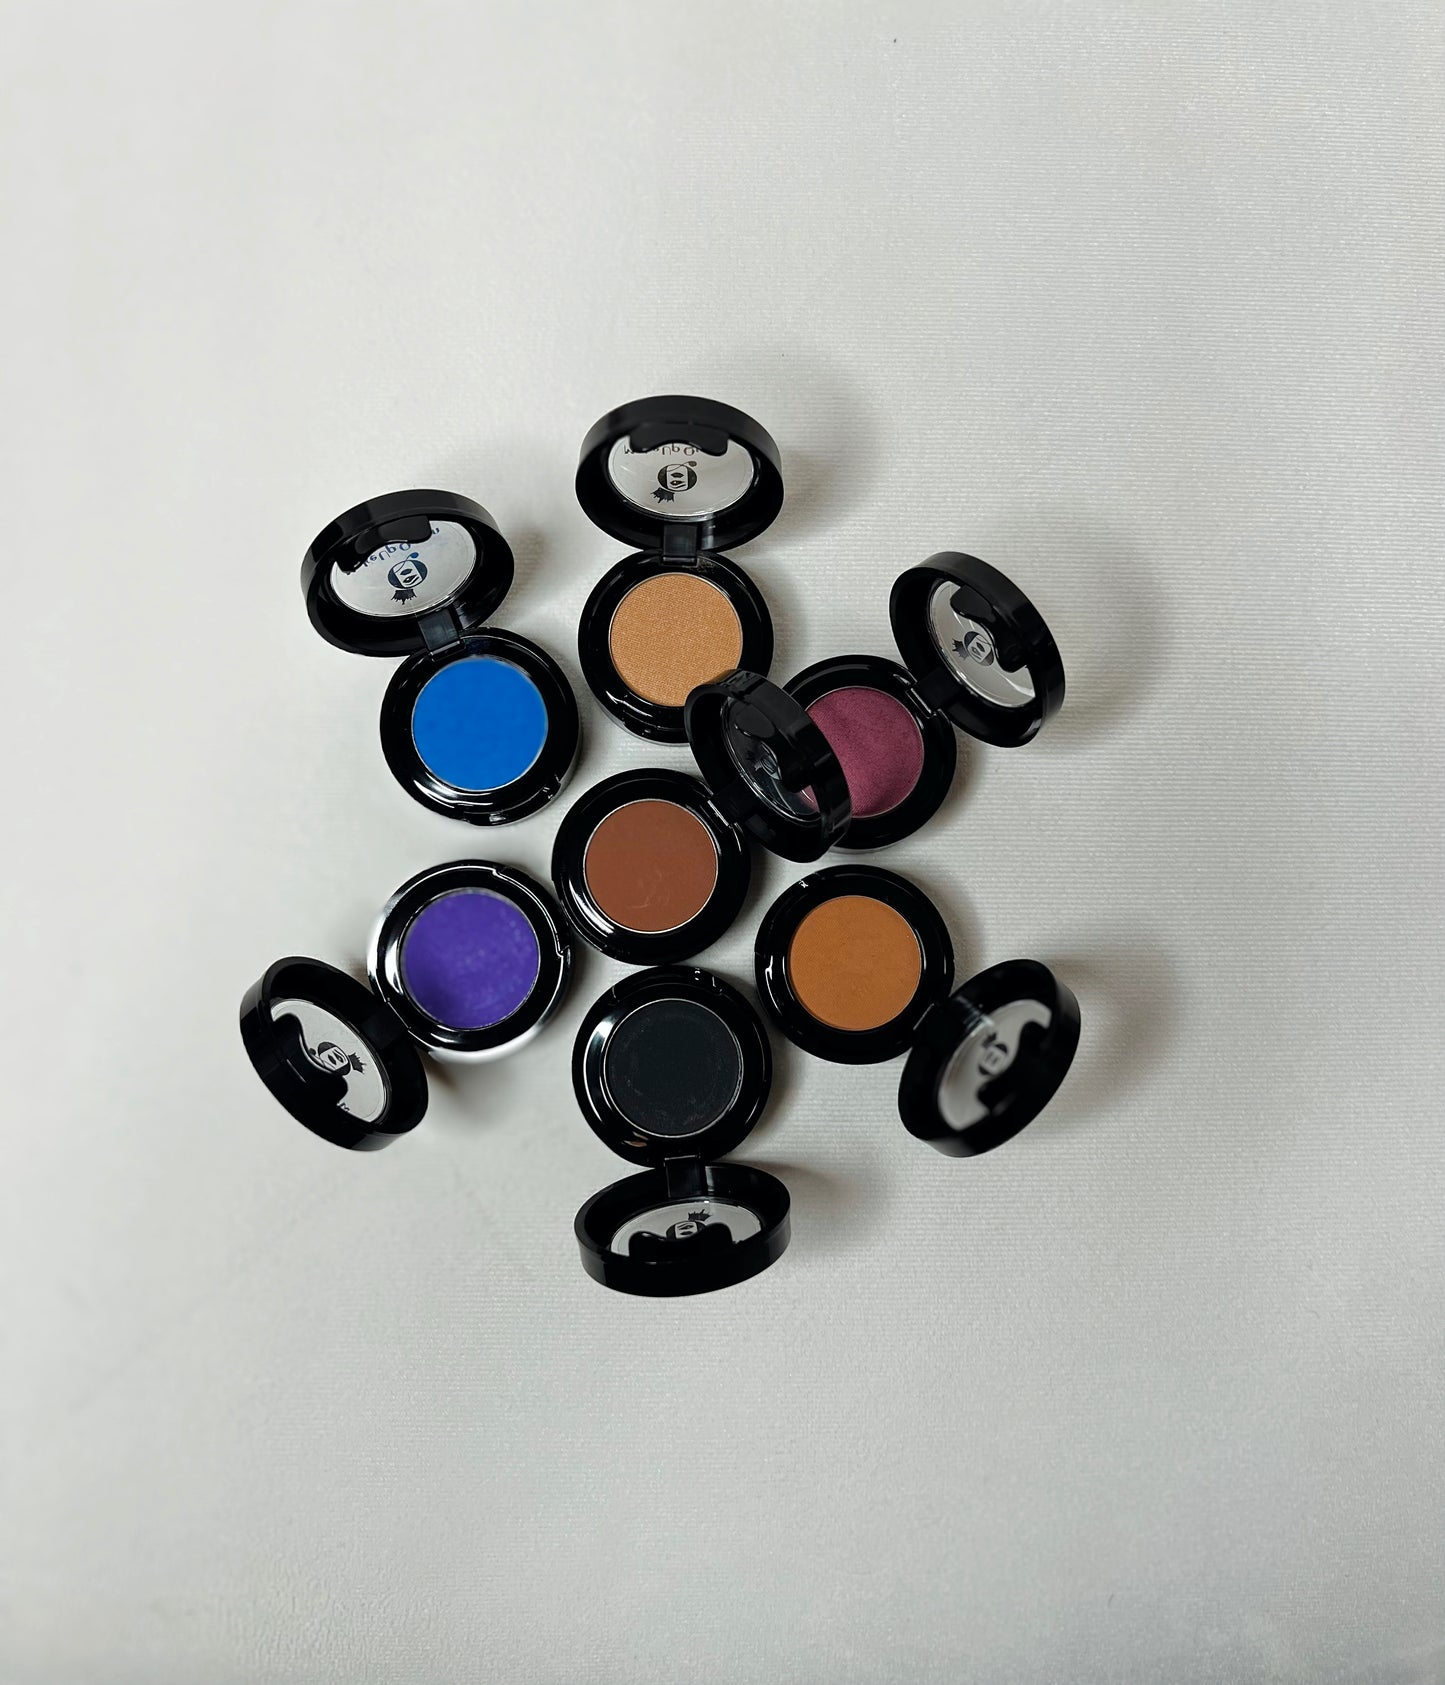 Paraben Free / EU Compliant / Gluten Free and Vegan /Cruelty Free   Net Wt. 2.5 g / .08 oz.   These refined Matte Eye Shadows have a high pigment density for longer lasting color. They blend easily and can be applied dry or wet for added intensity and drama.